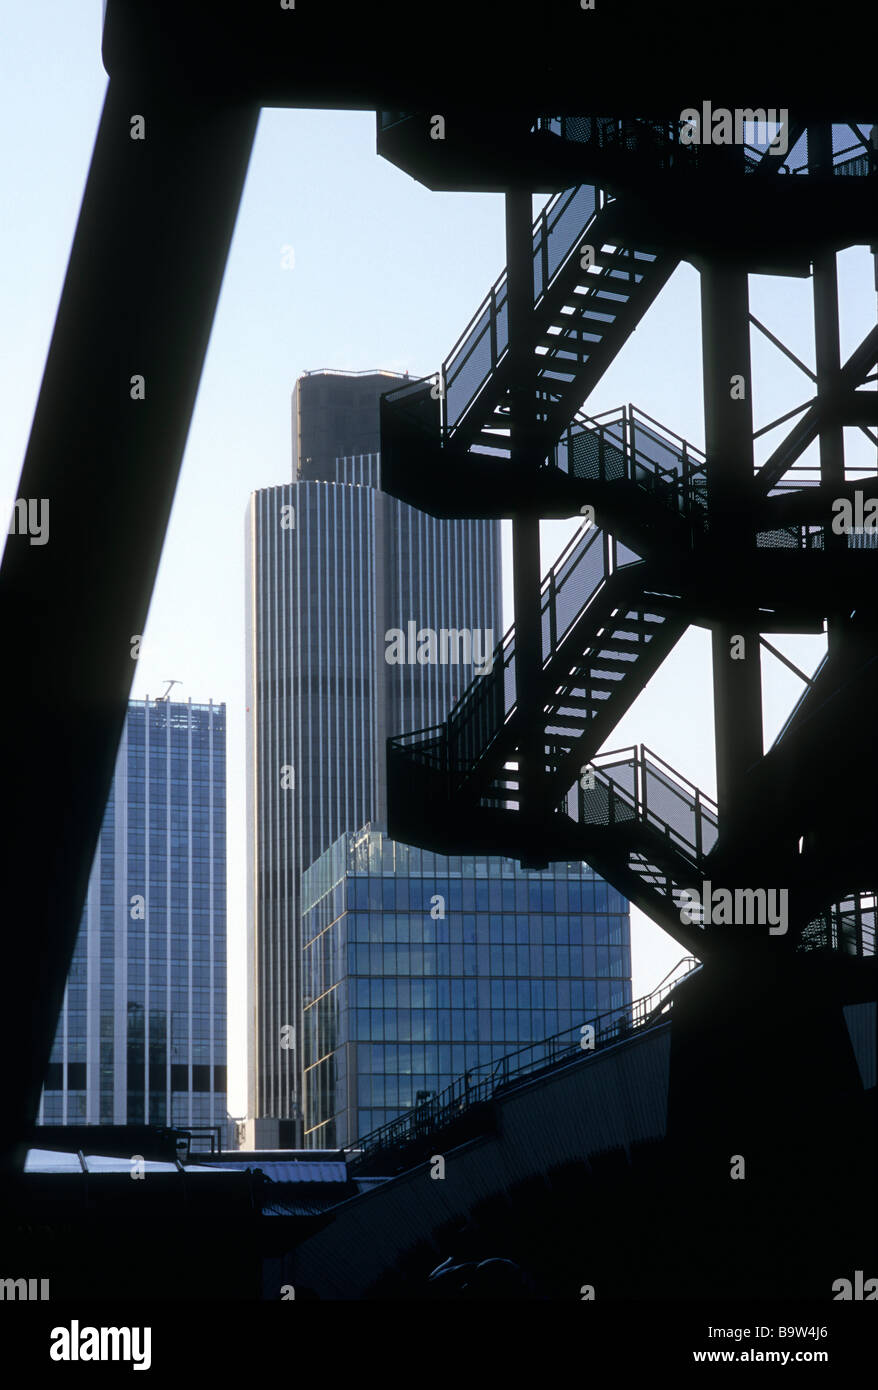 Tower 42 (NatWest tower) behind silhouette of staircase Stock Photo